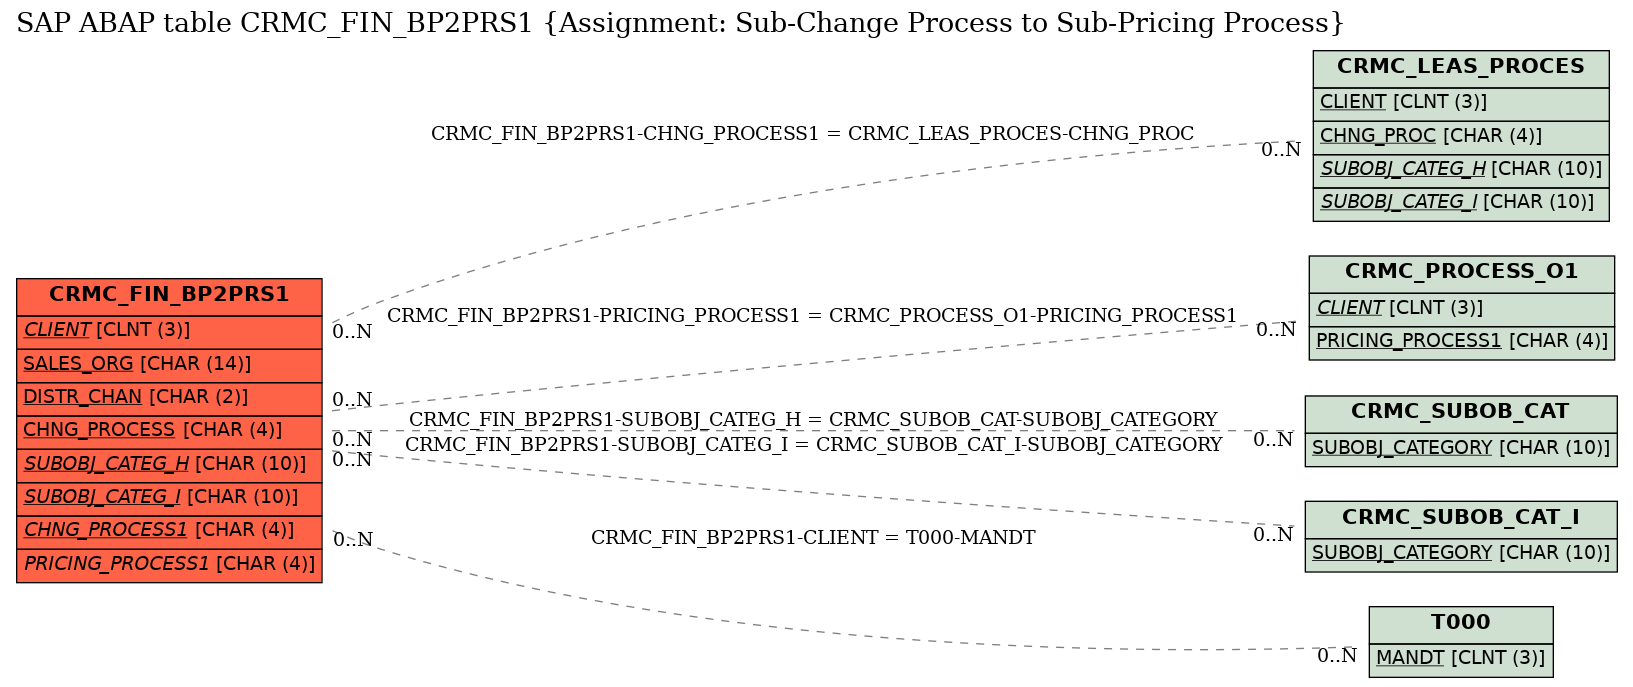 E-R Diagram for table CRMC_FIN_BP2PRS1 (Assignment: Sub-Change Process to Sub-Pricing Process)